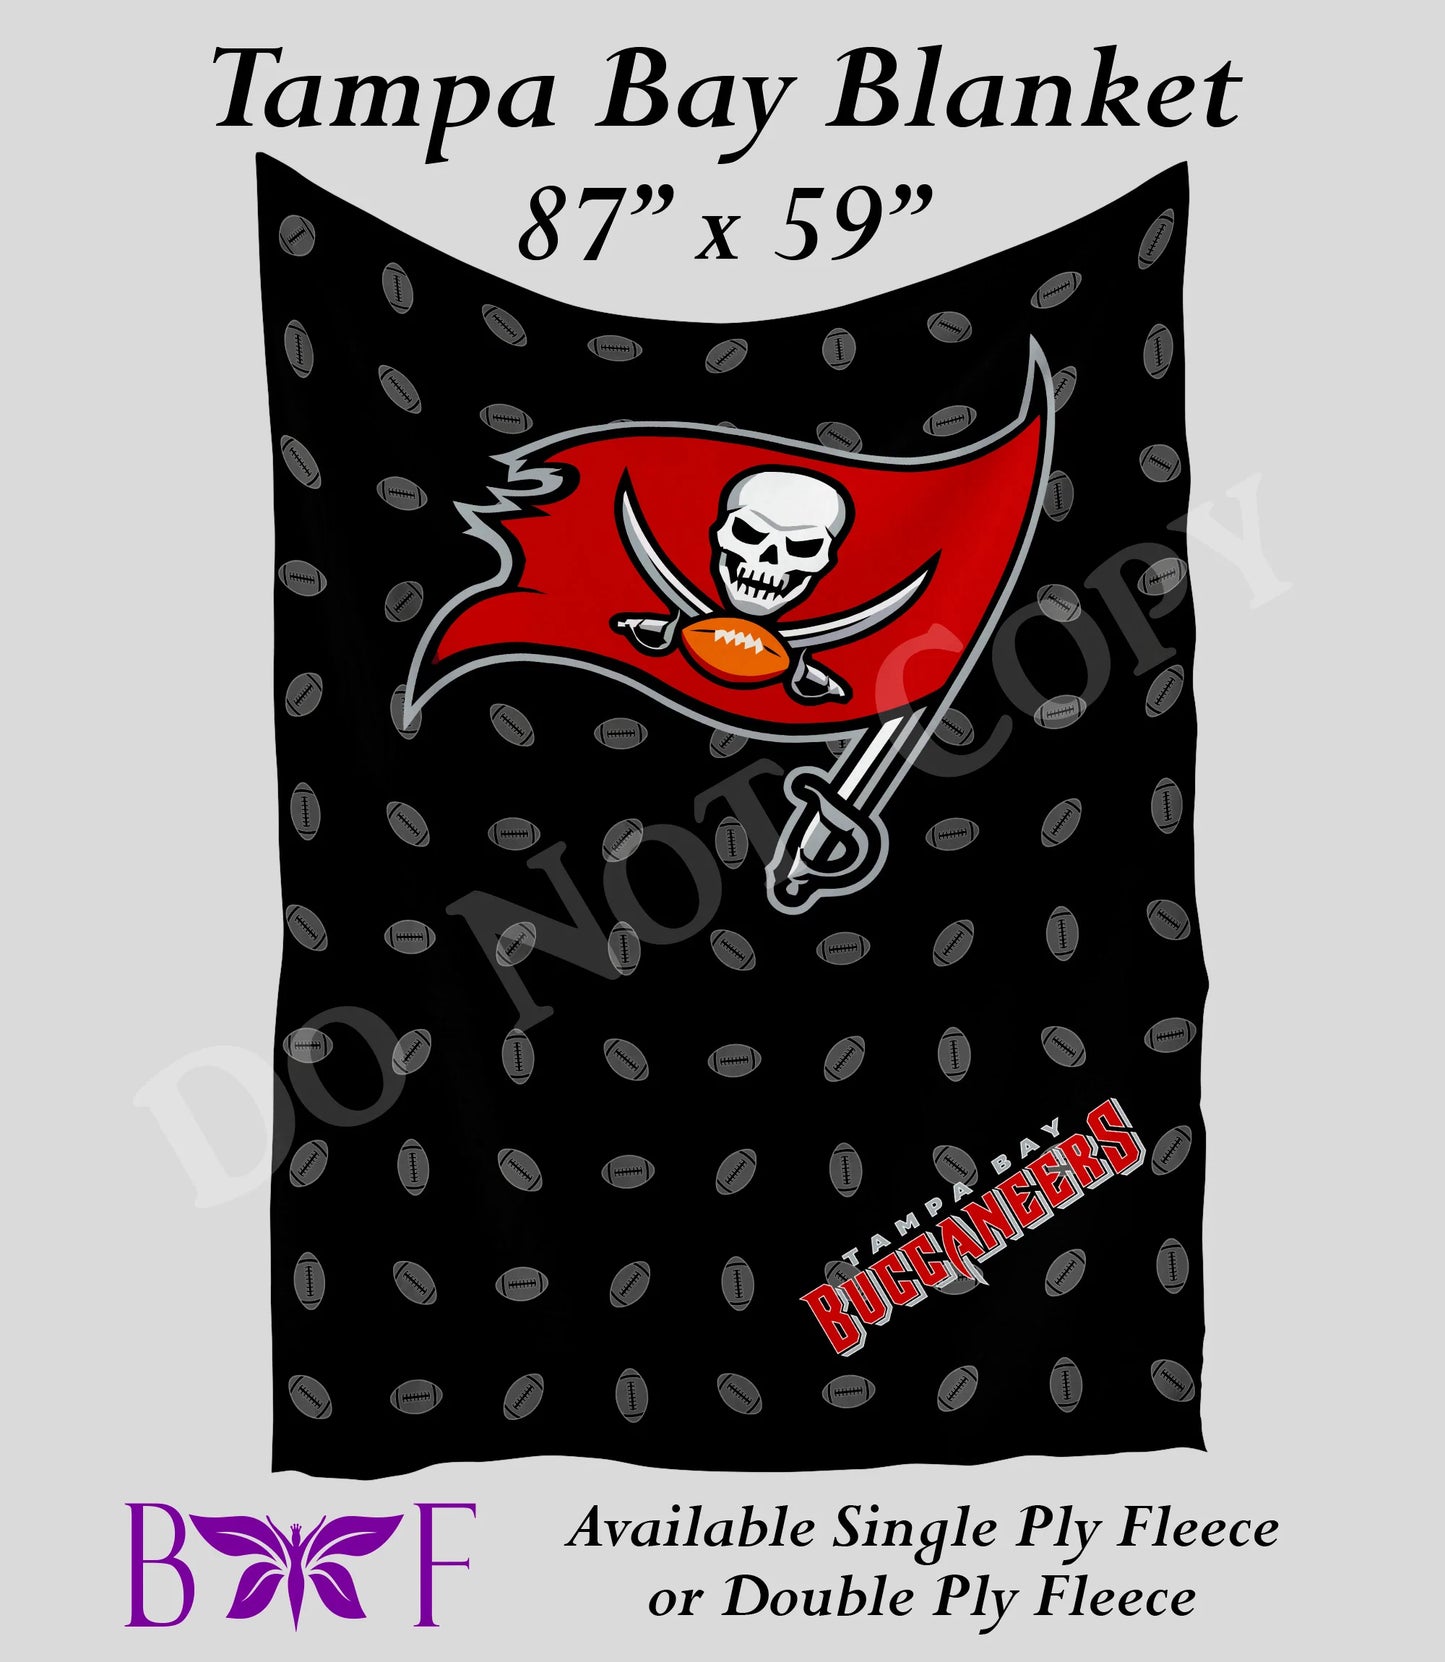 Tampa Bay 59"x87" soft blanket also available with sherpa fleece preorder #1018